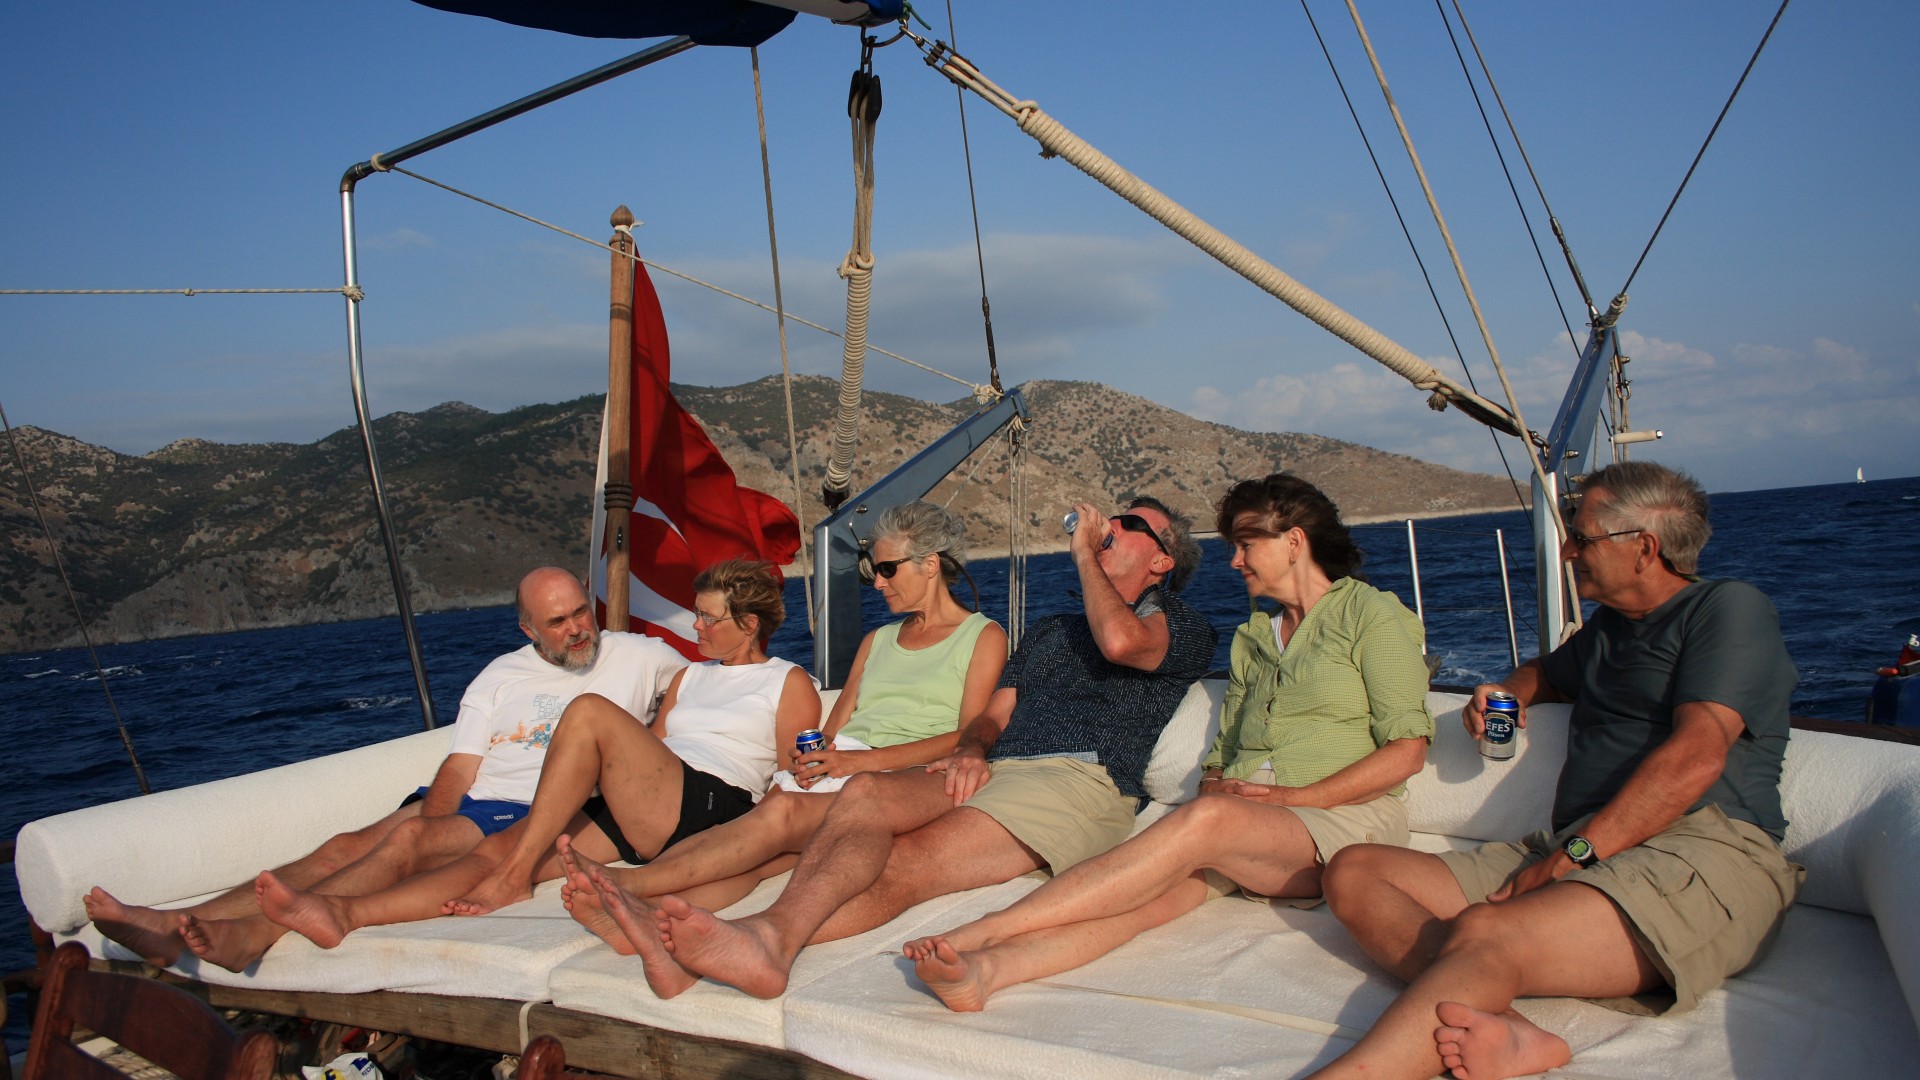 Guests enjoying a drink on the yacht deck at sunset in Turkey